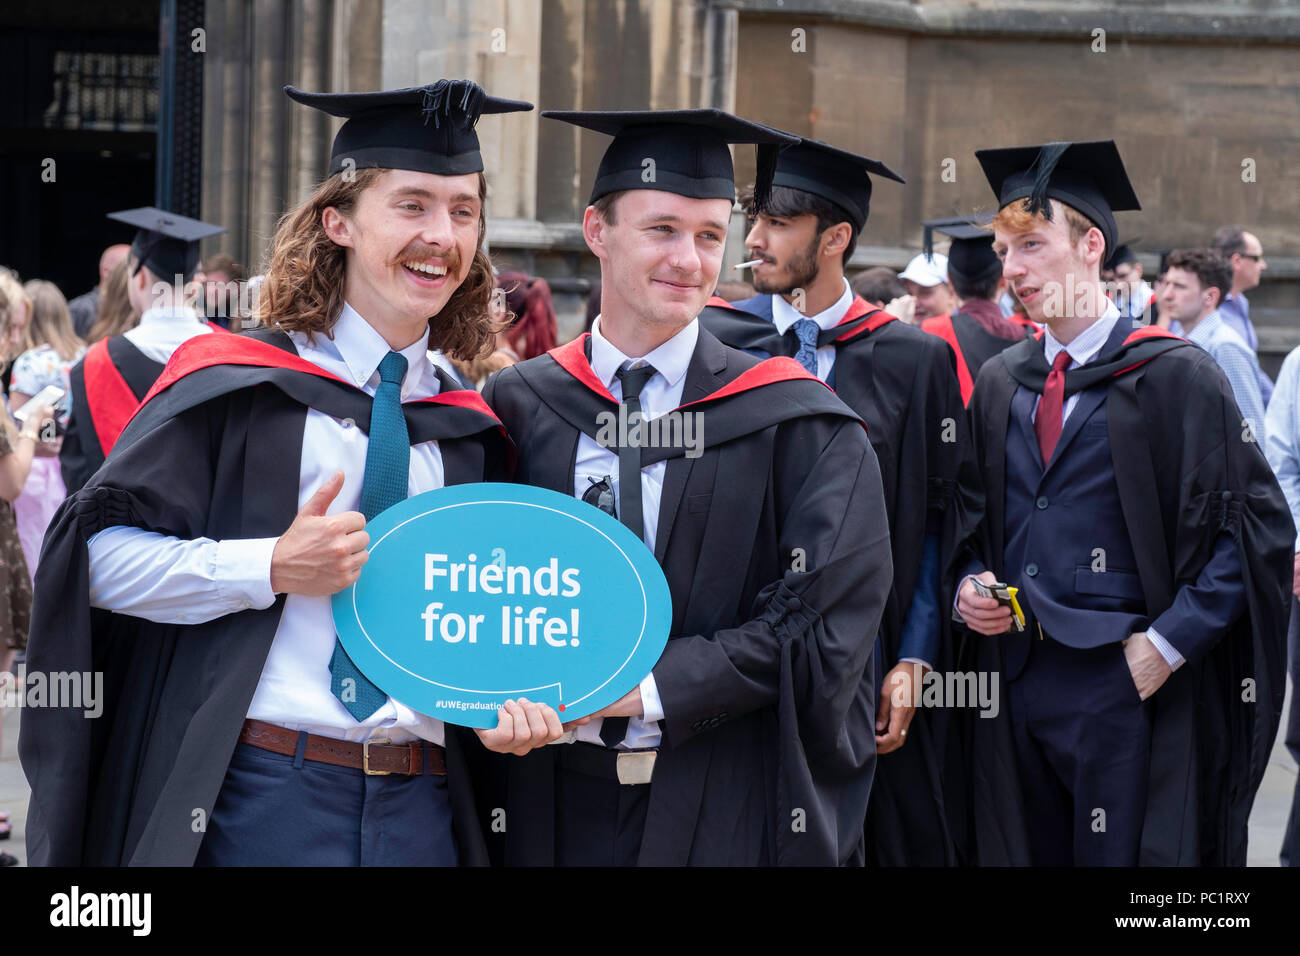 Crowd of young men celebrating graduation holding sign,'Friends for Life' after graduation ceremony in Bristol, England YK. Stock Photo